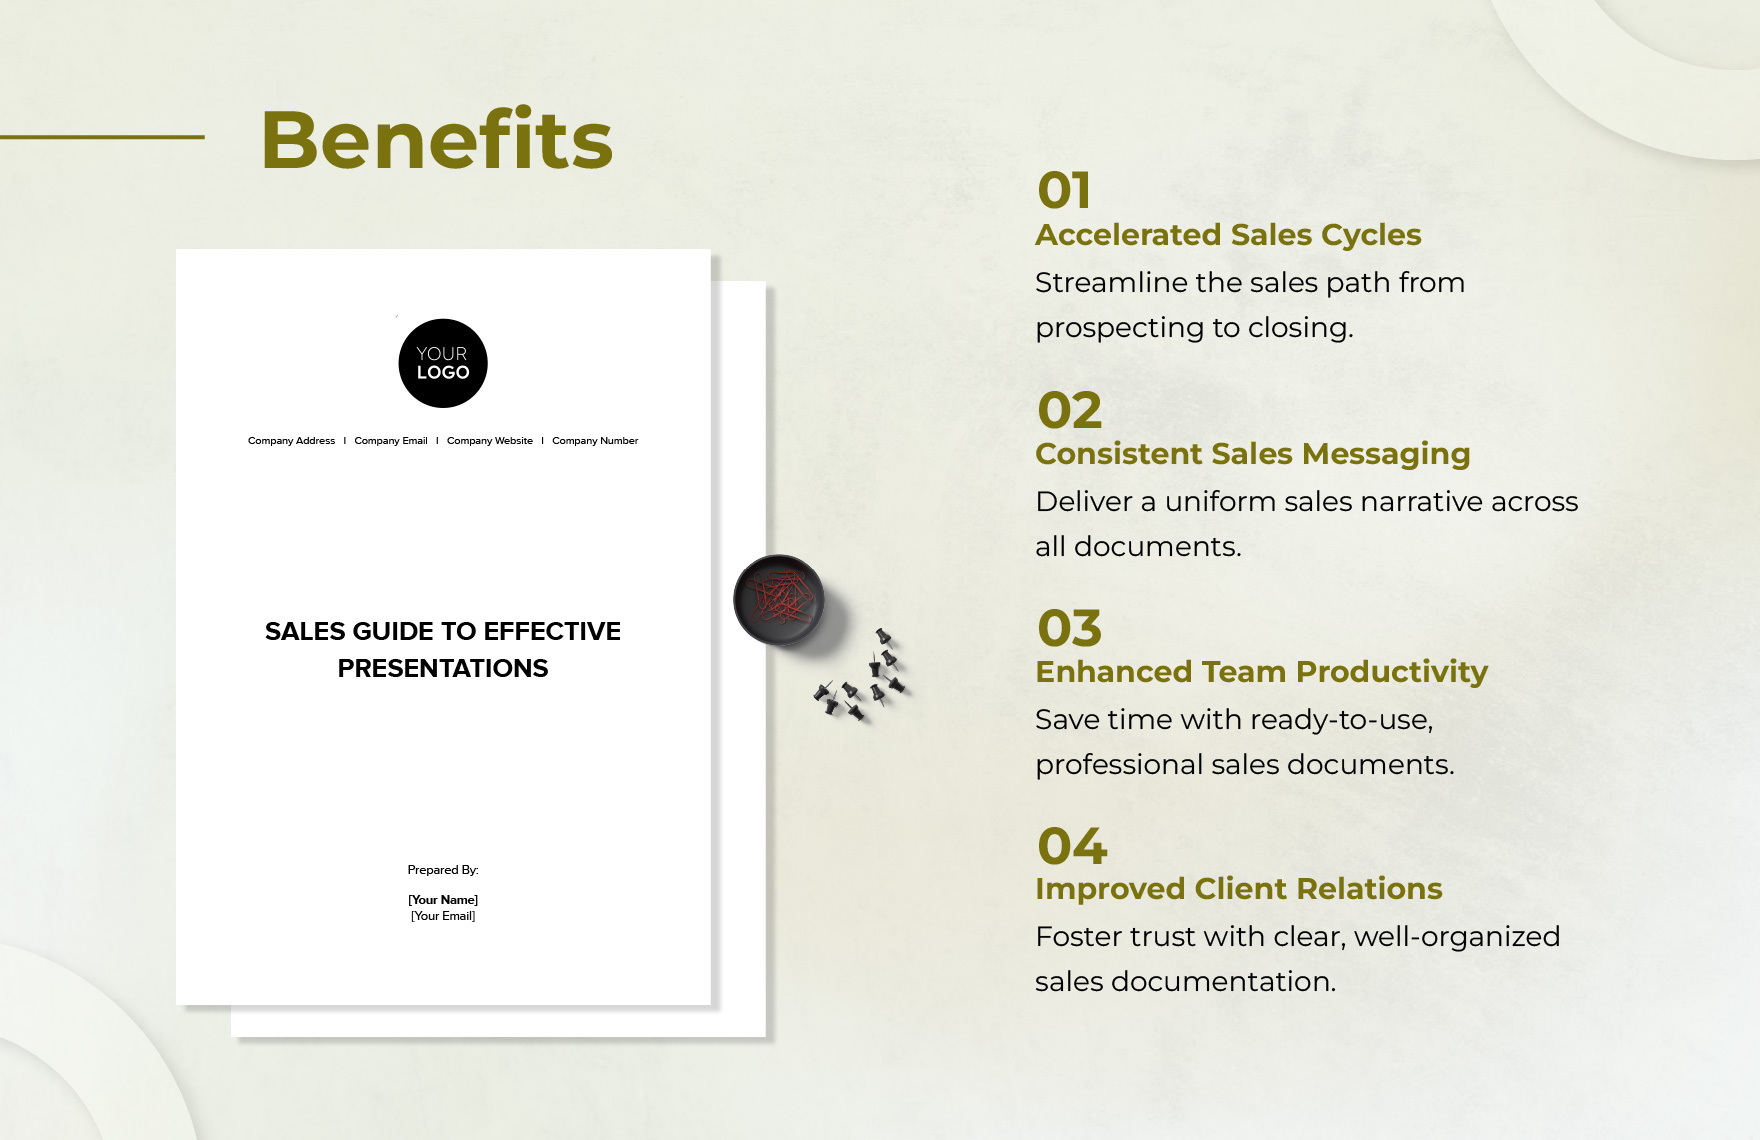 Sales Guide to Effective Presentations Template